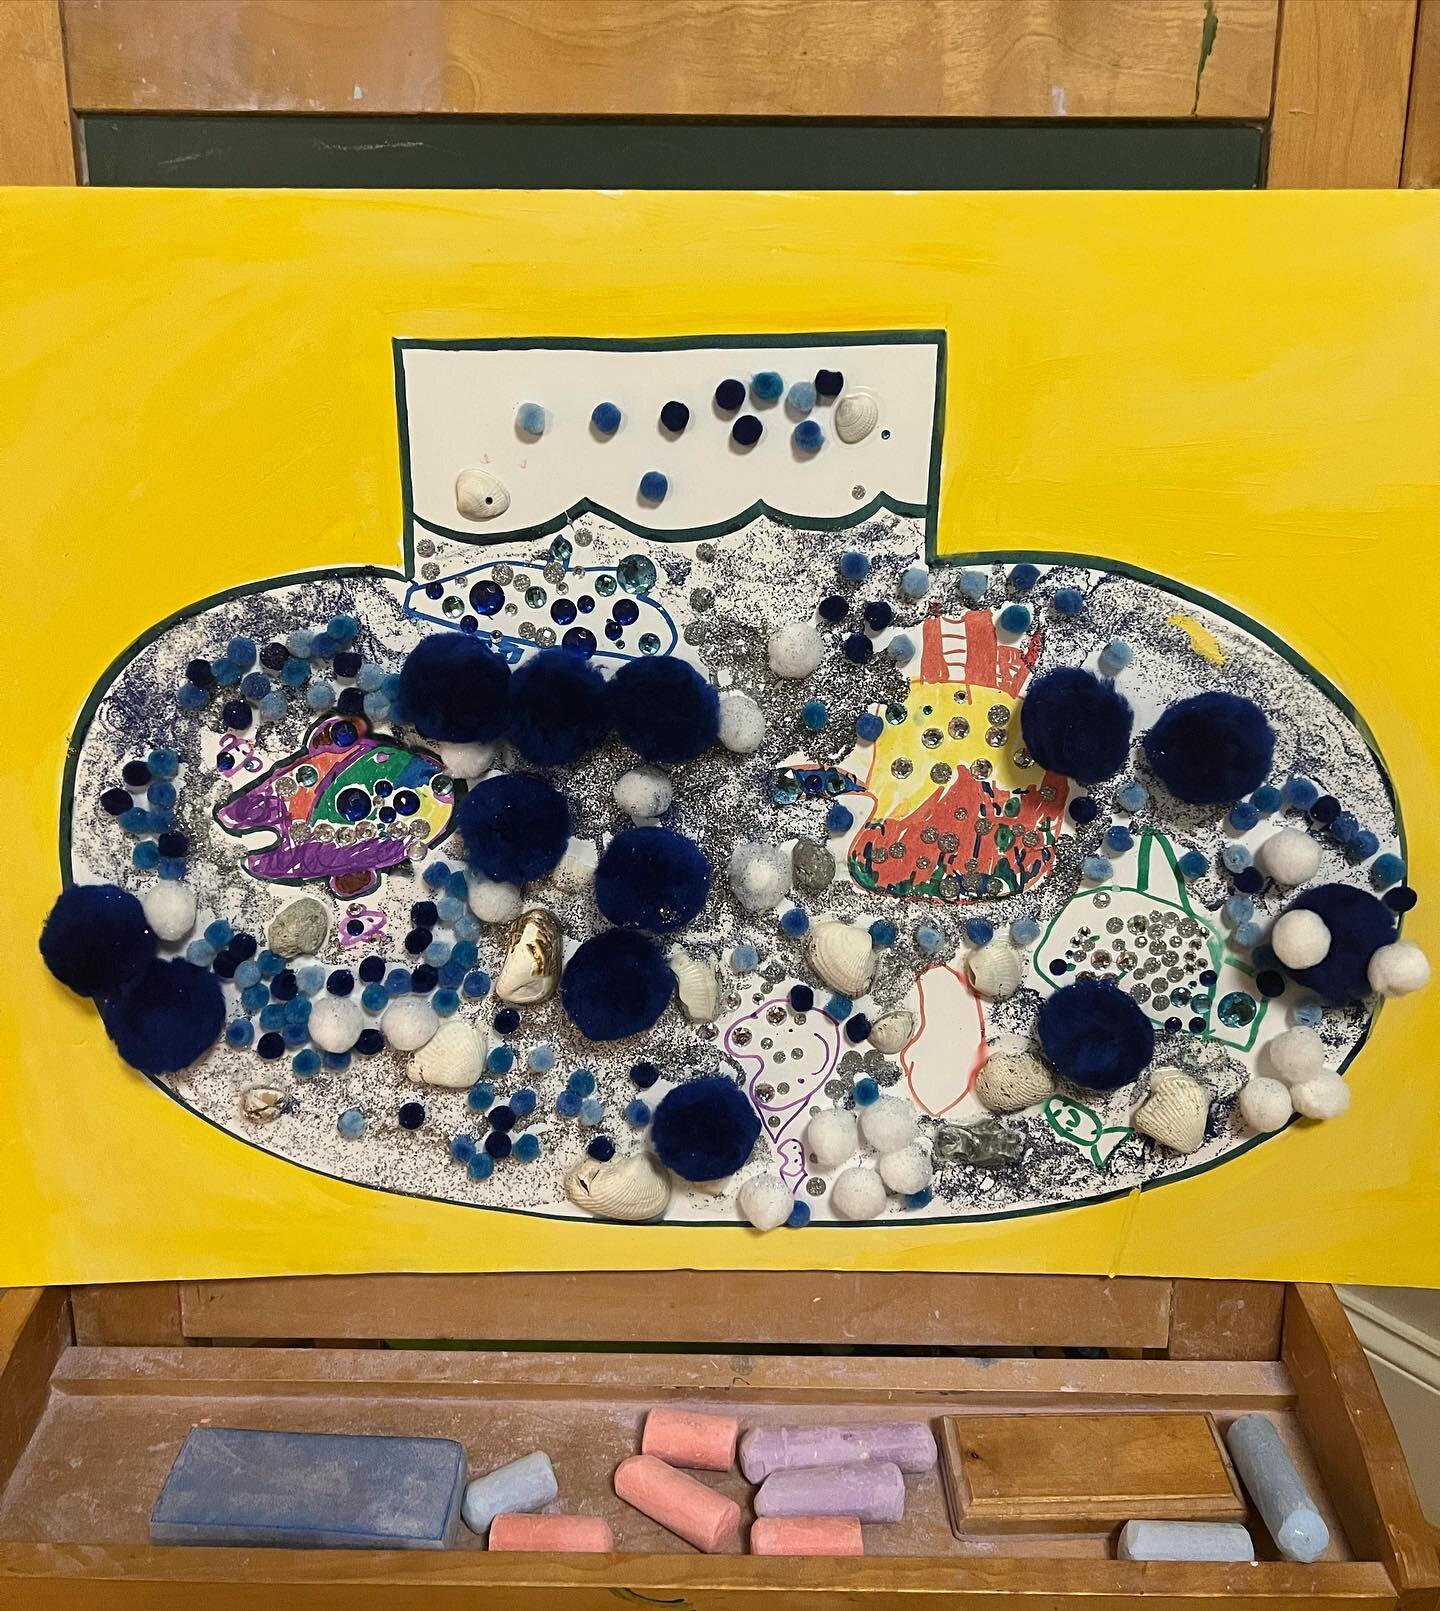 We started with individual fish... that come together in a group... all different with different experiences. Next, We shared our grief story about the special person that died. Following that we created the water and bubbles while sharing all of the